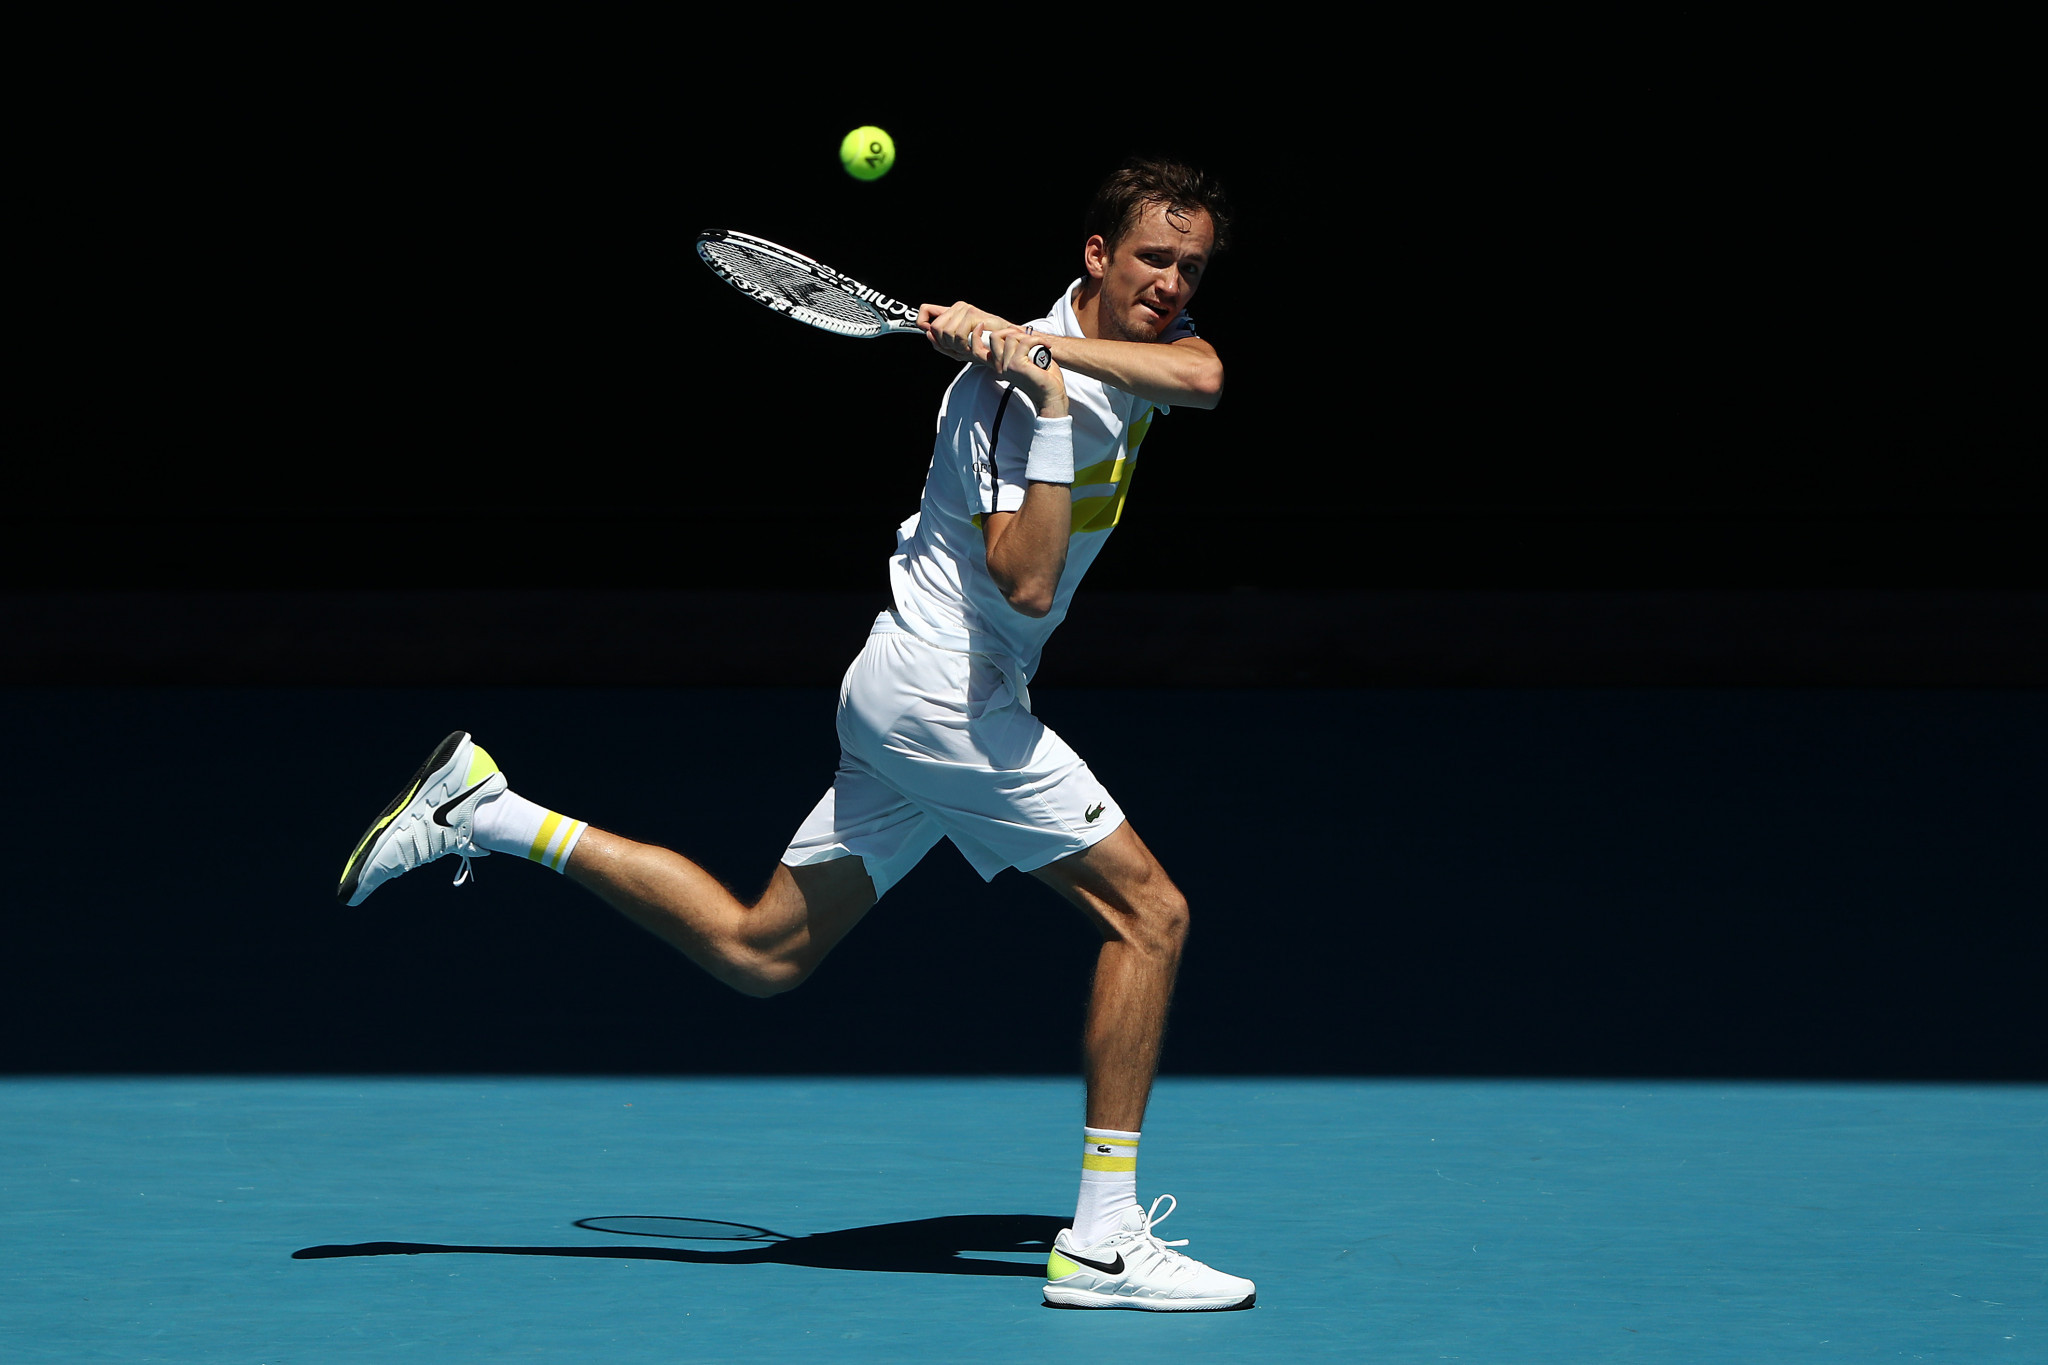 Russia's Daniil Medvedev also booked a place in the Australian Open quarter-finals ©Getty Images